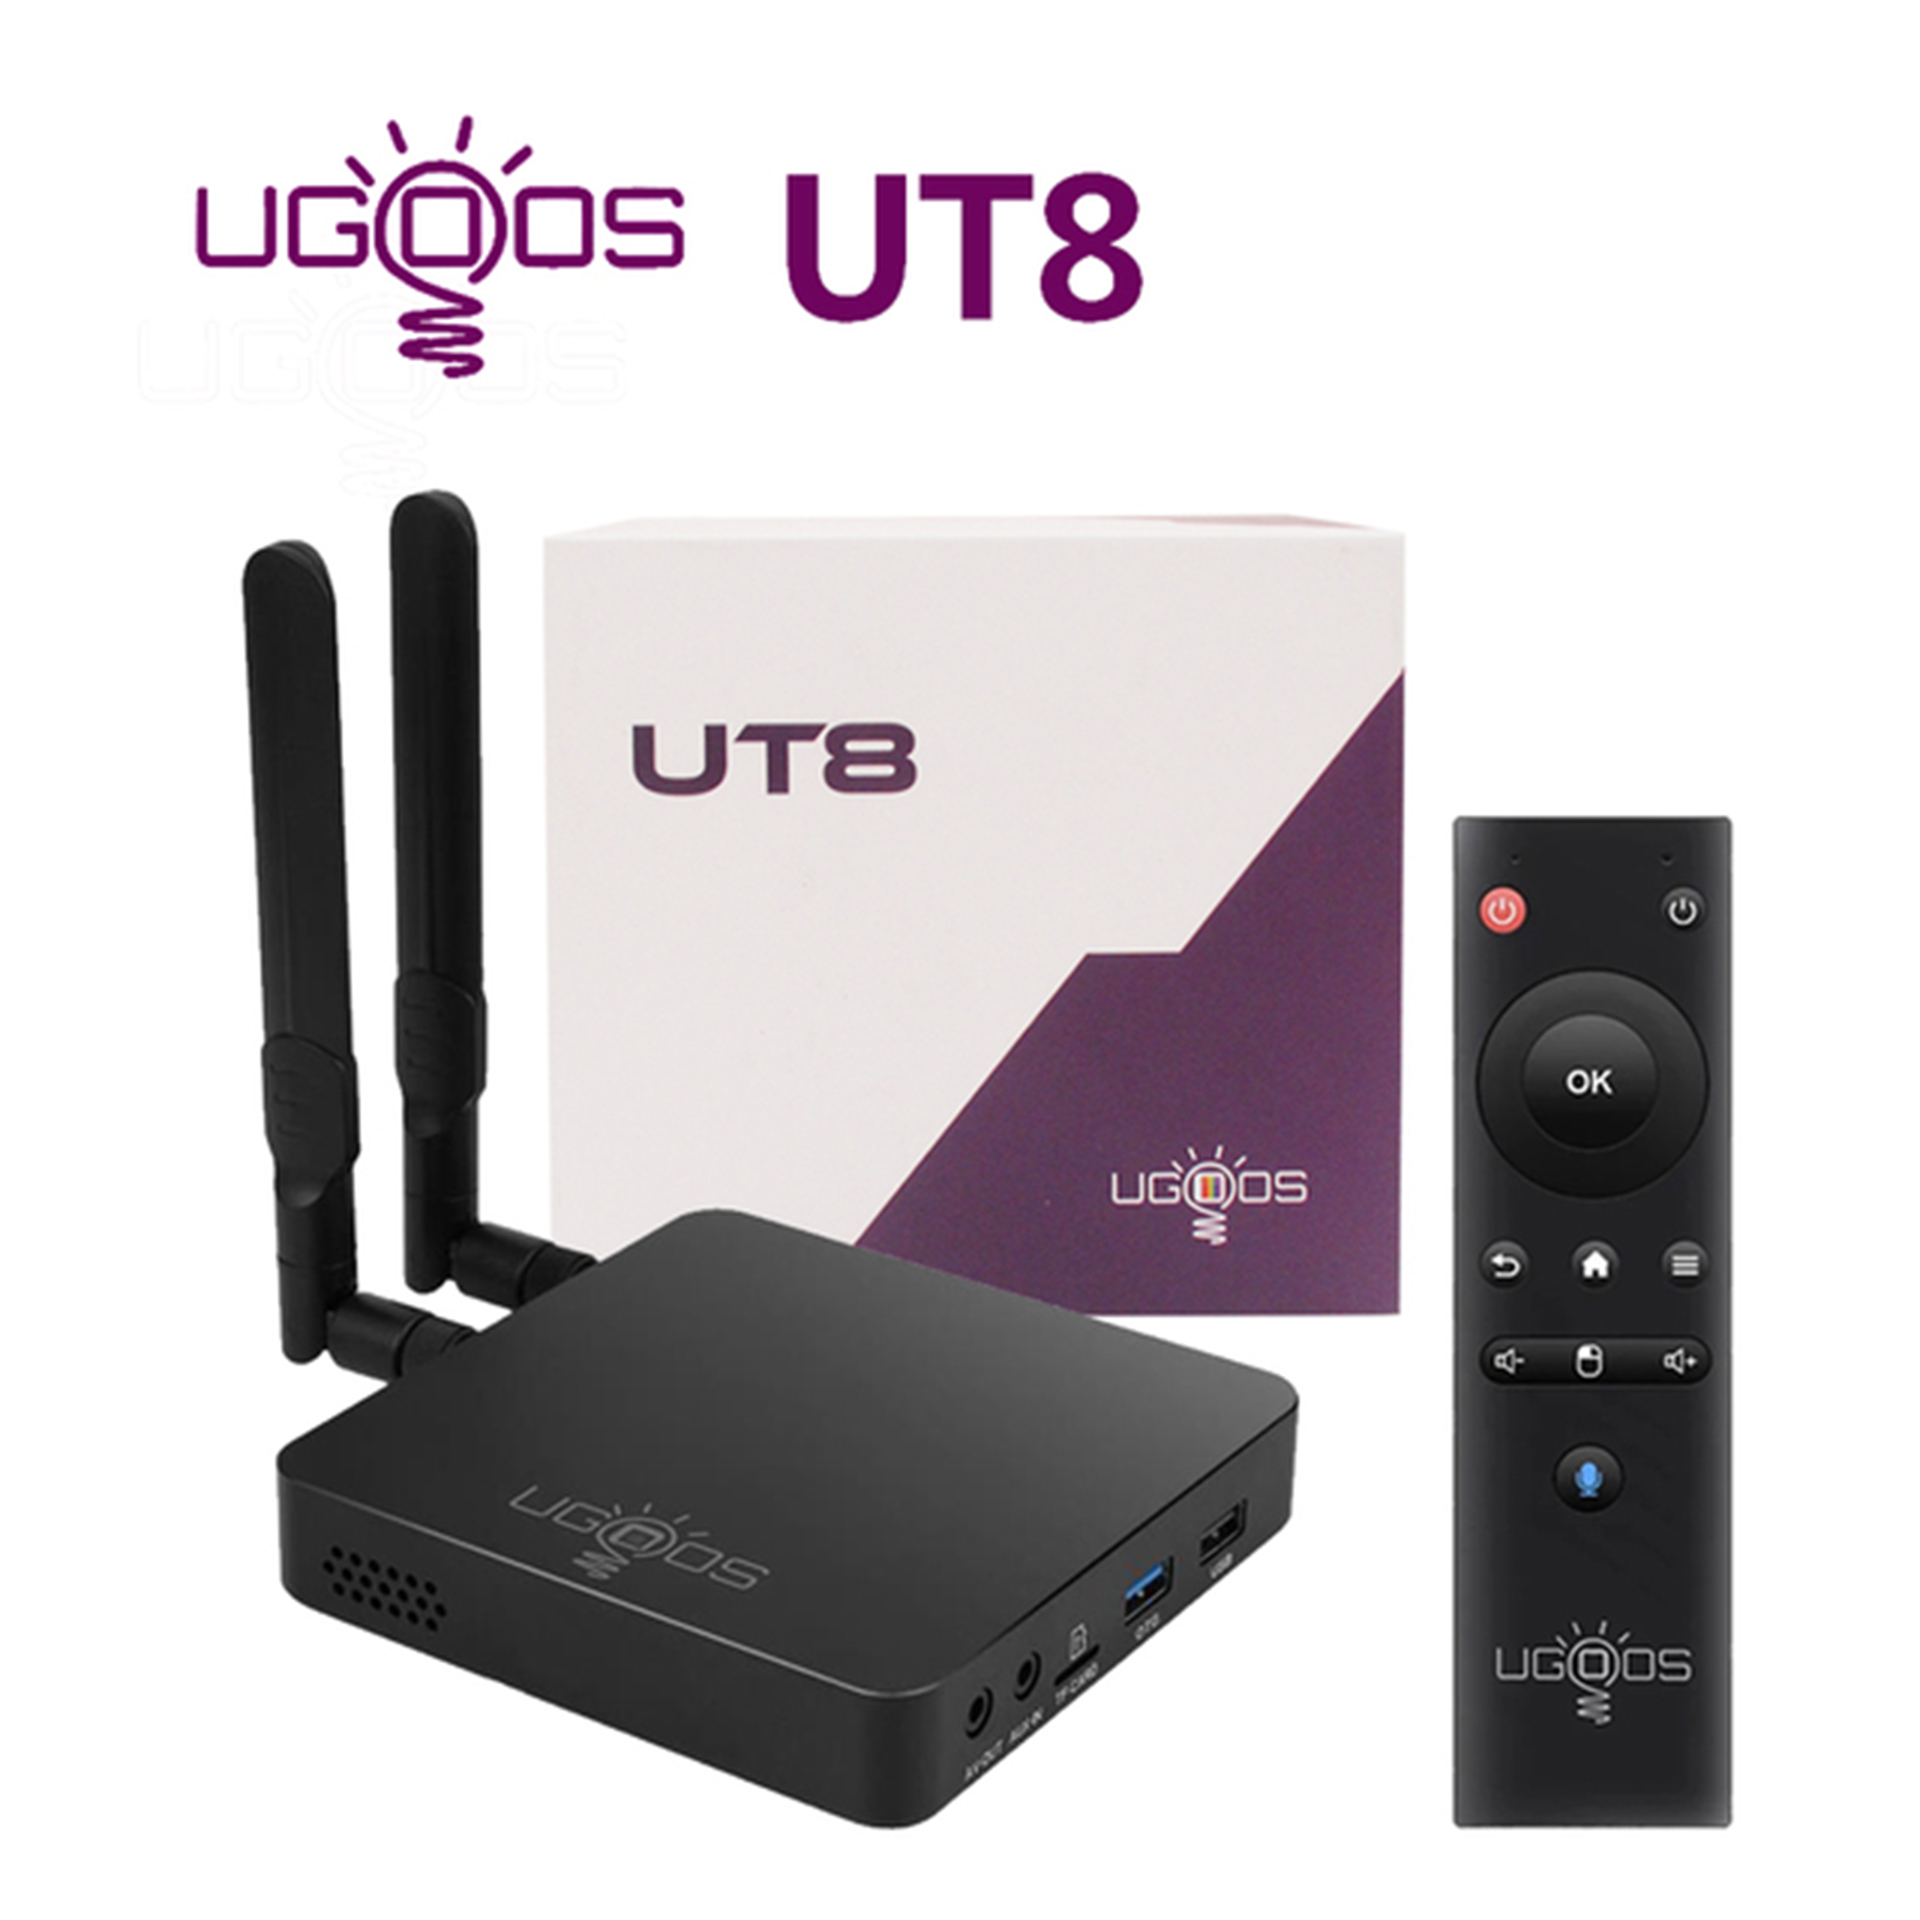 UGOOS UT8 Rockchip RK3568 DDR4 4GB 32GB eMMC Android 11 WIFI 6 1000M LAN 4K@60fps HDR10 BT 5.0 Smart TV BOX with  bluetooth Voice Remote